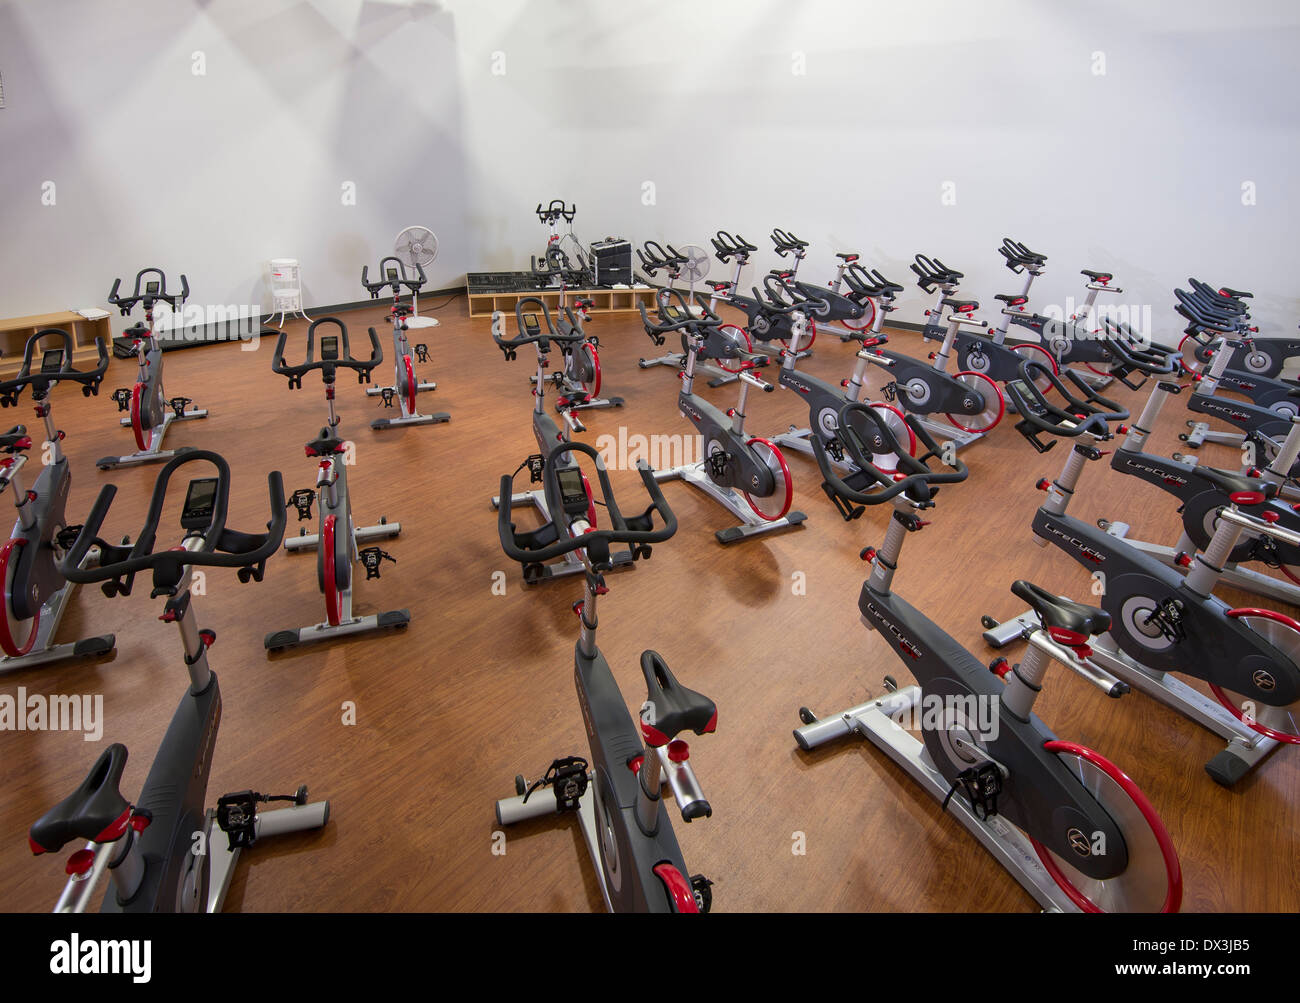 Spinning Class At Fitness Center Stock Photo